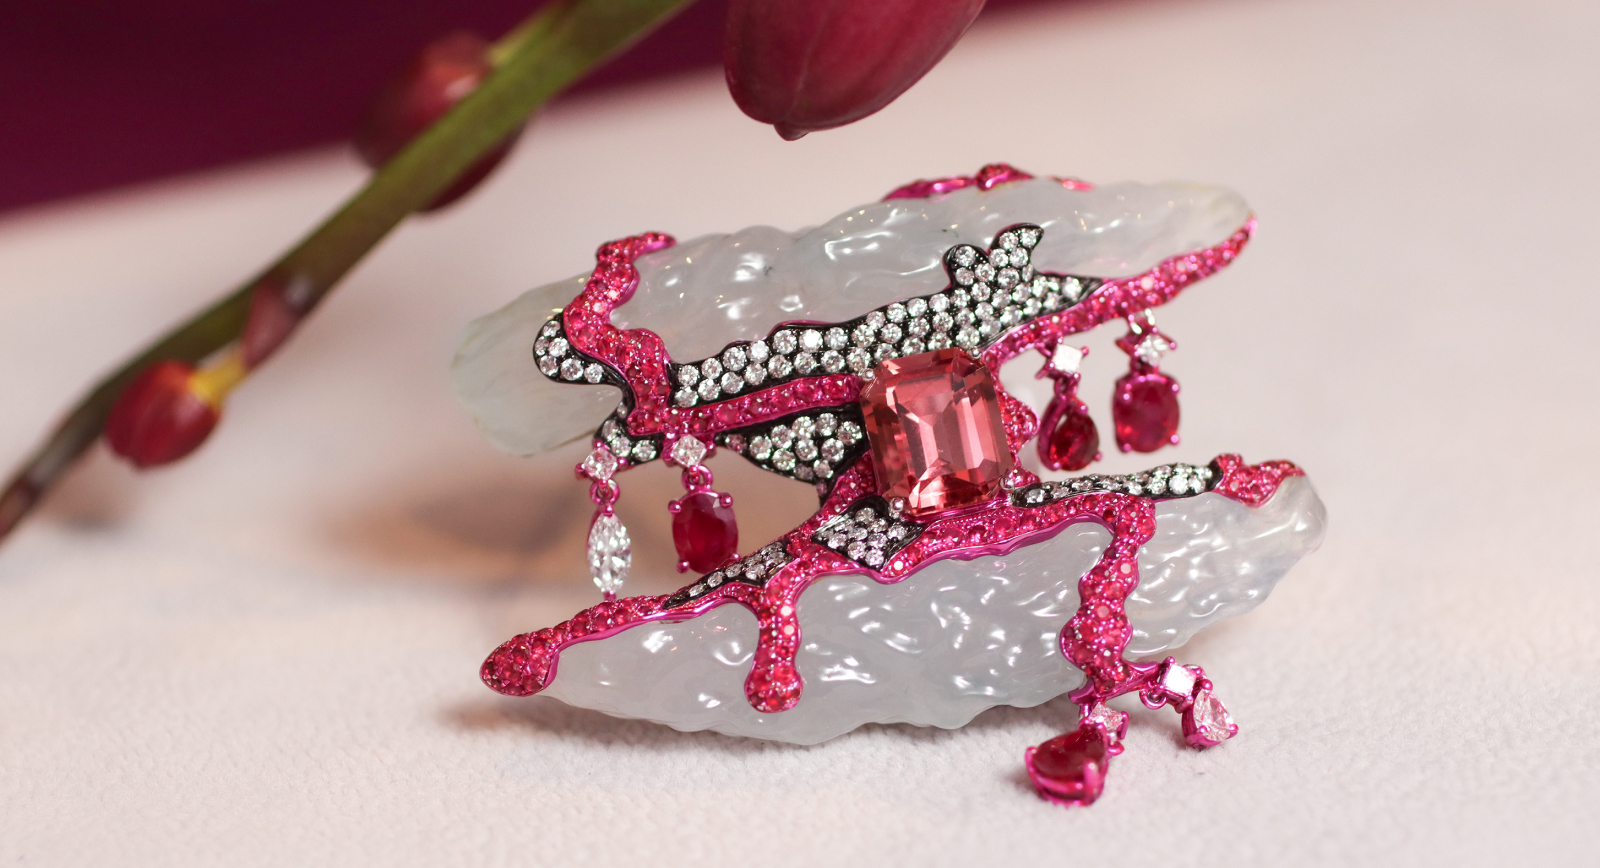 Austy Lee 'The Red Ice Brooch' in 18K white gold with Brazilian pink tourmaline, rubies, Burmese white jades and diamonds 